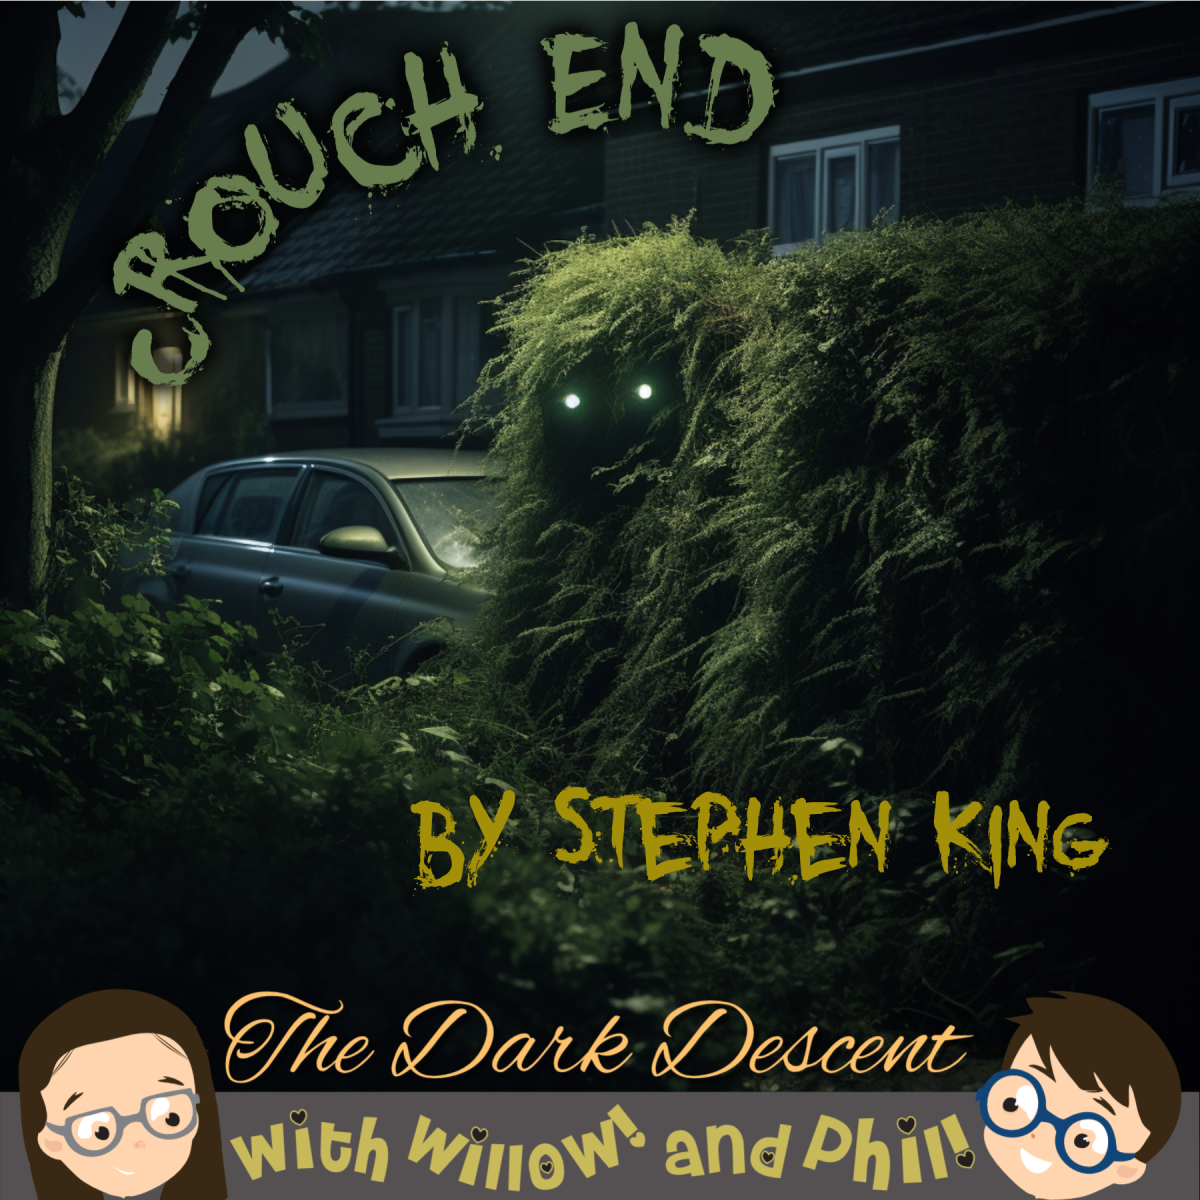 The Dark Descent – “Crouch End” by Stephen King